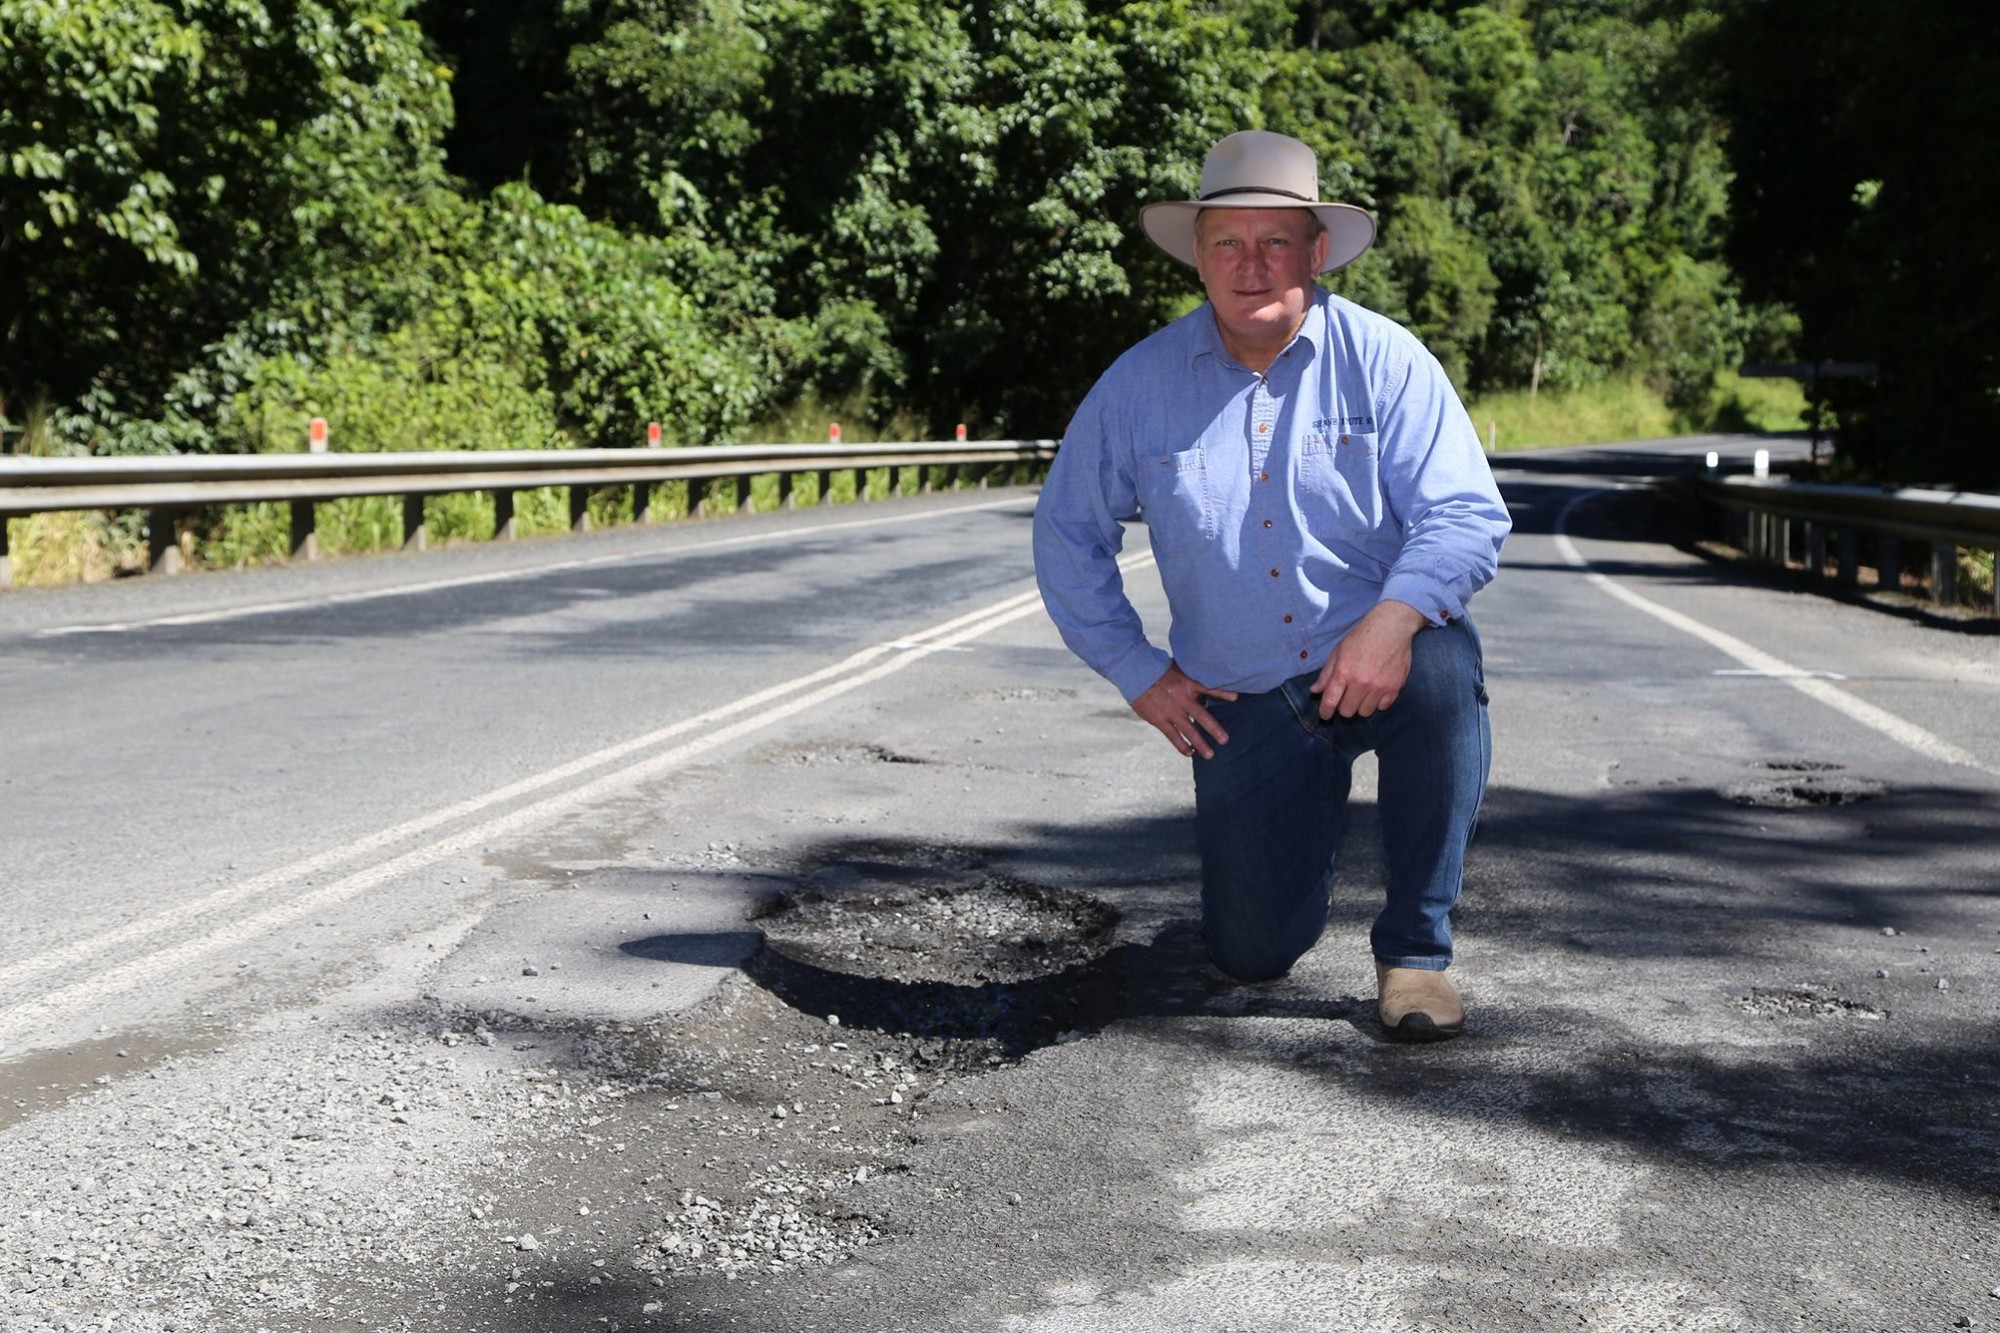 Palmerston Highway set for upgrade - feature photo